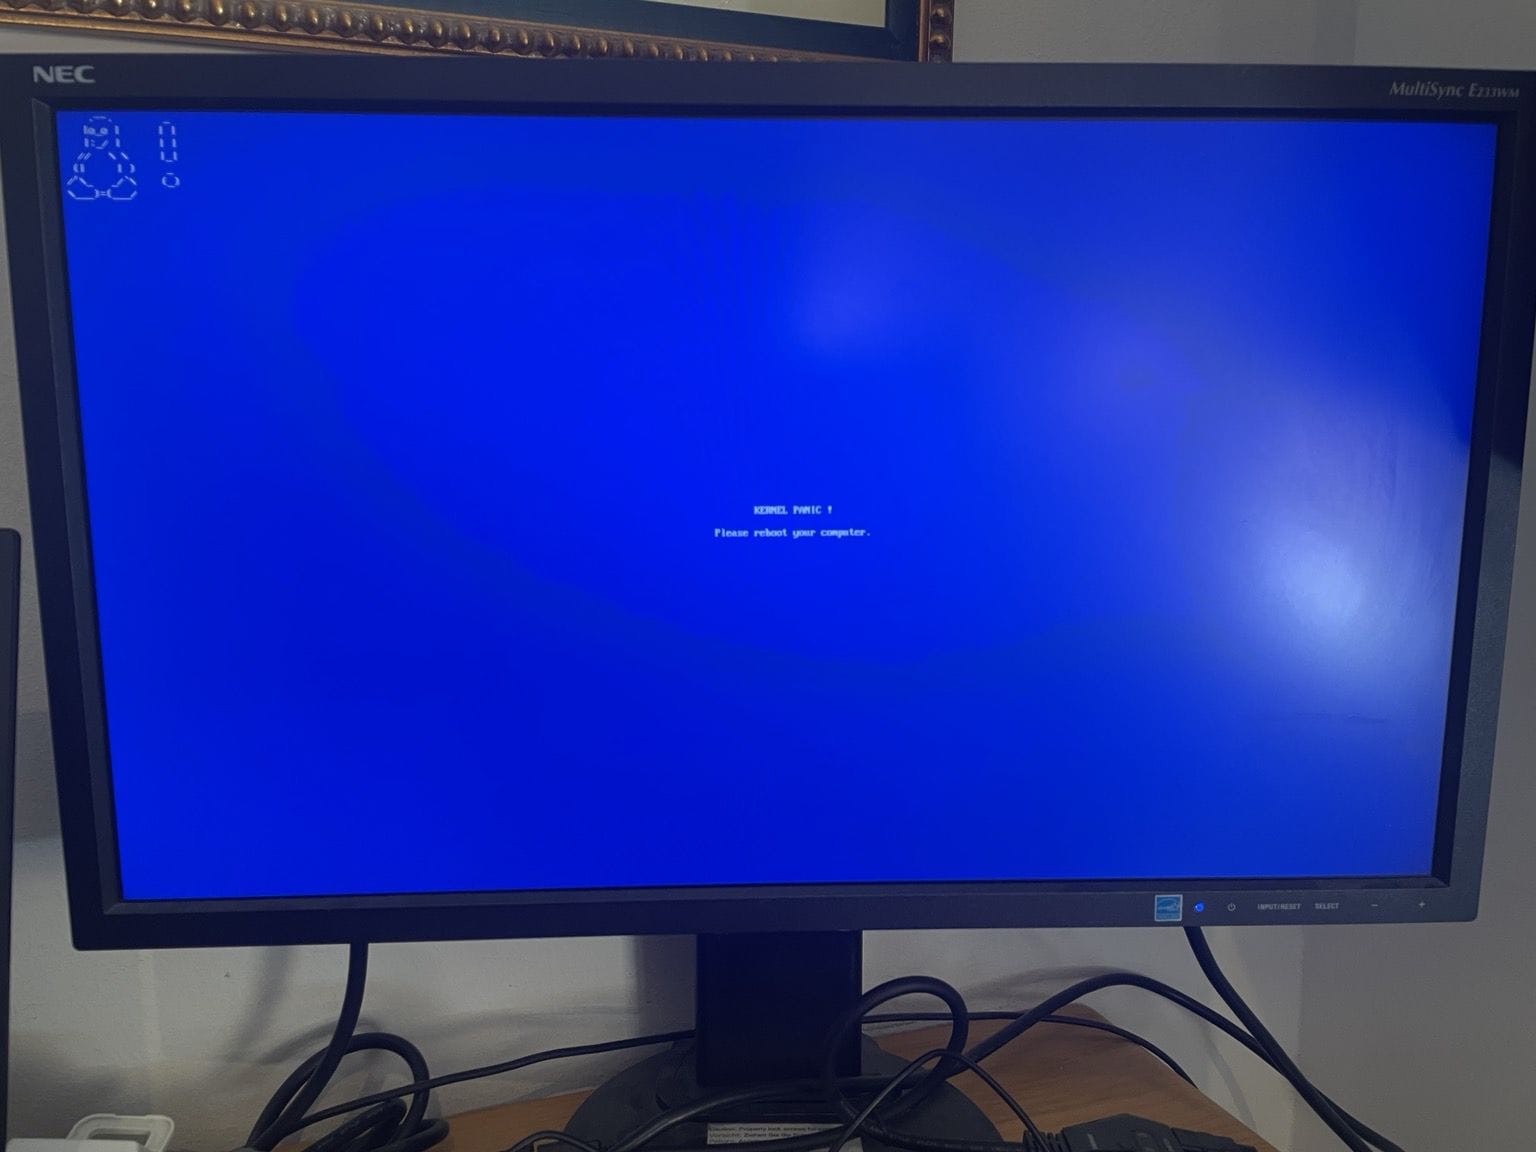 a photo showing a drm panic message with a blue background